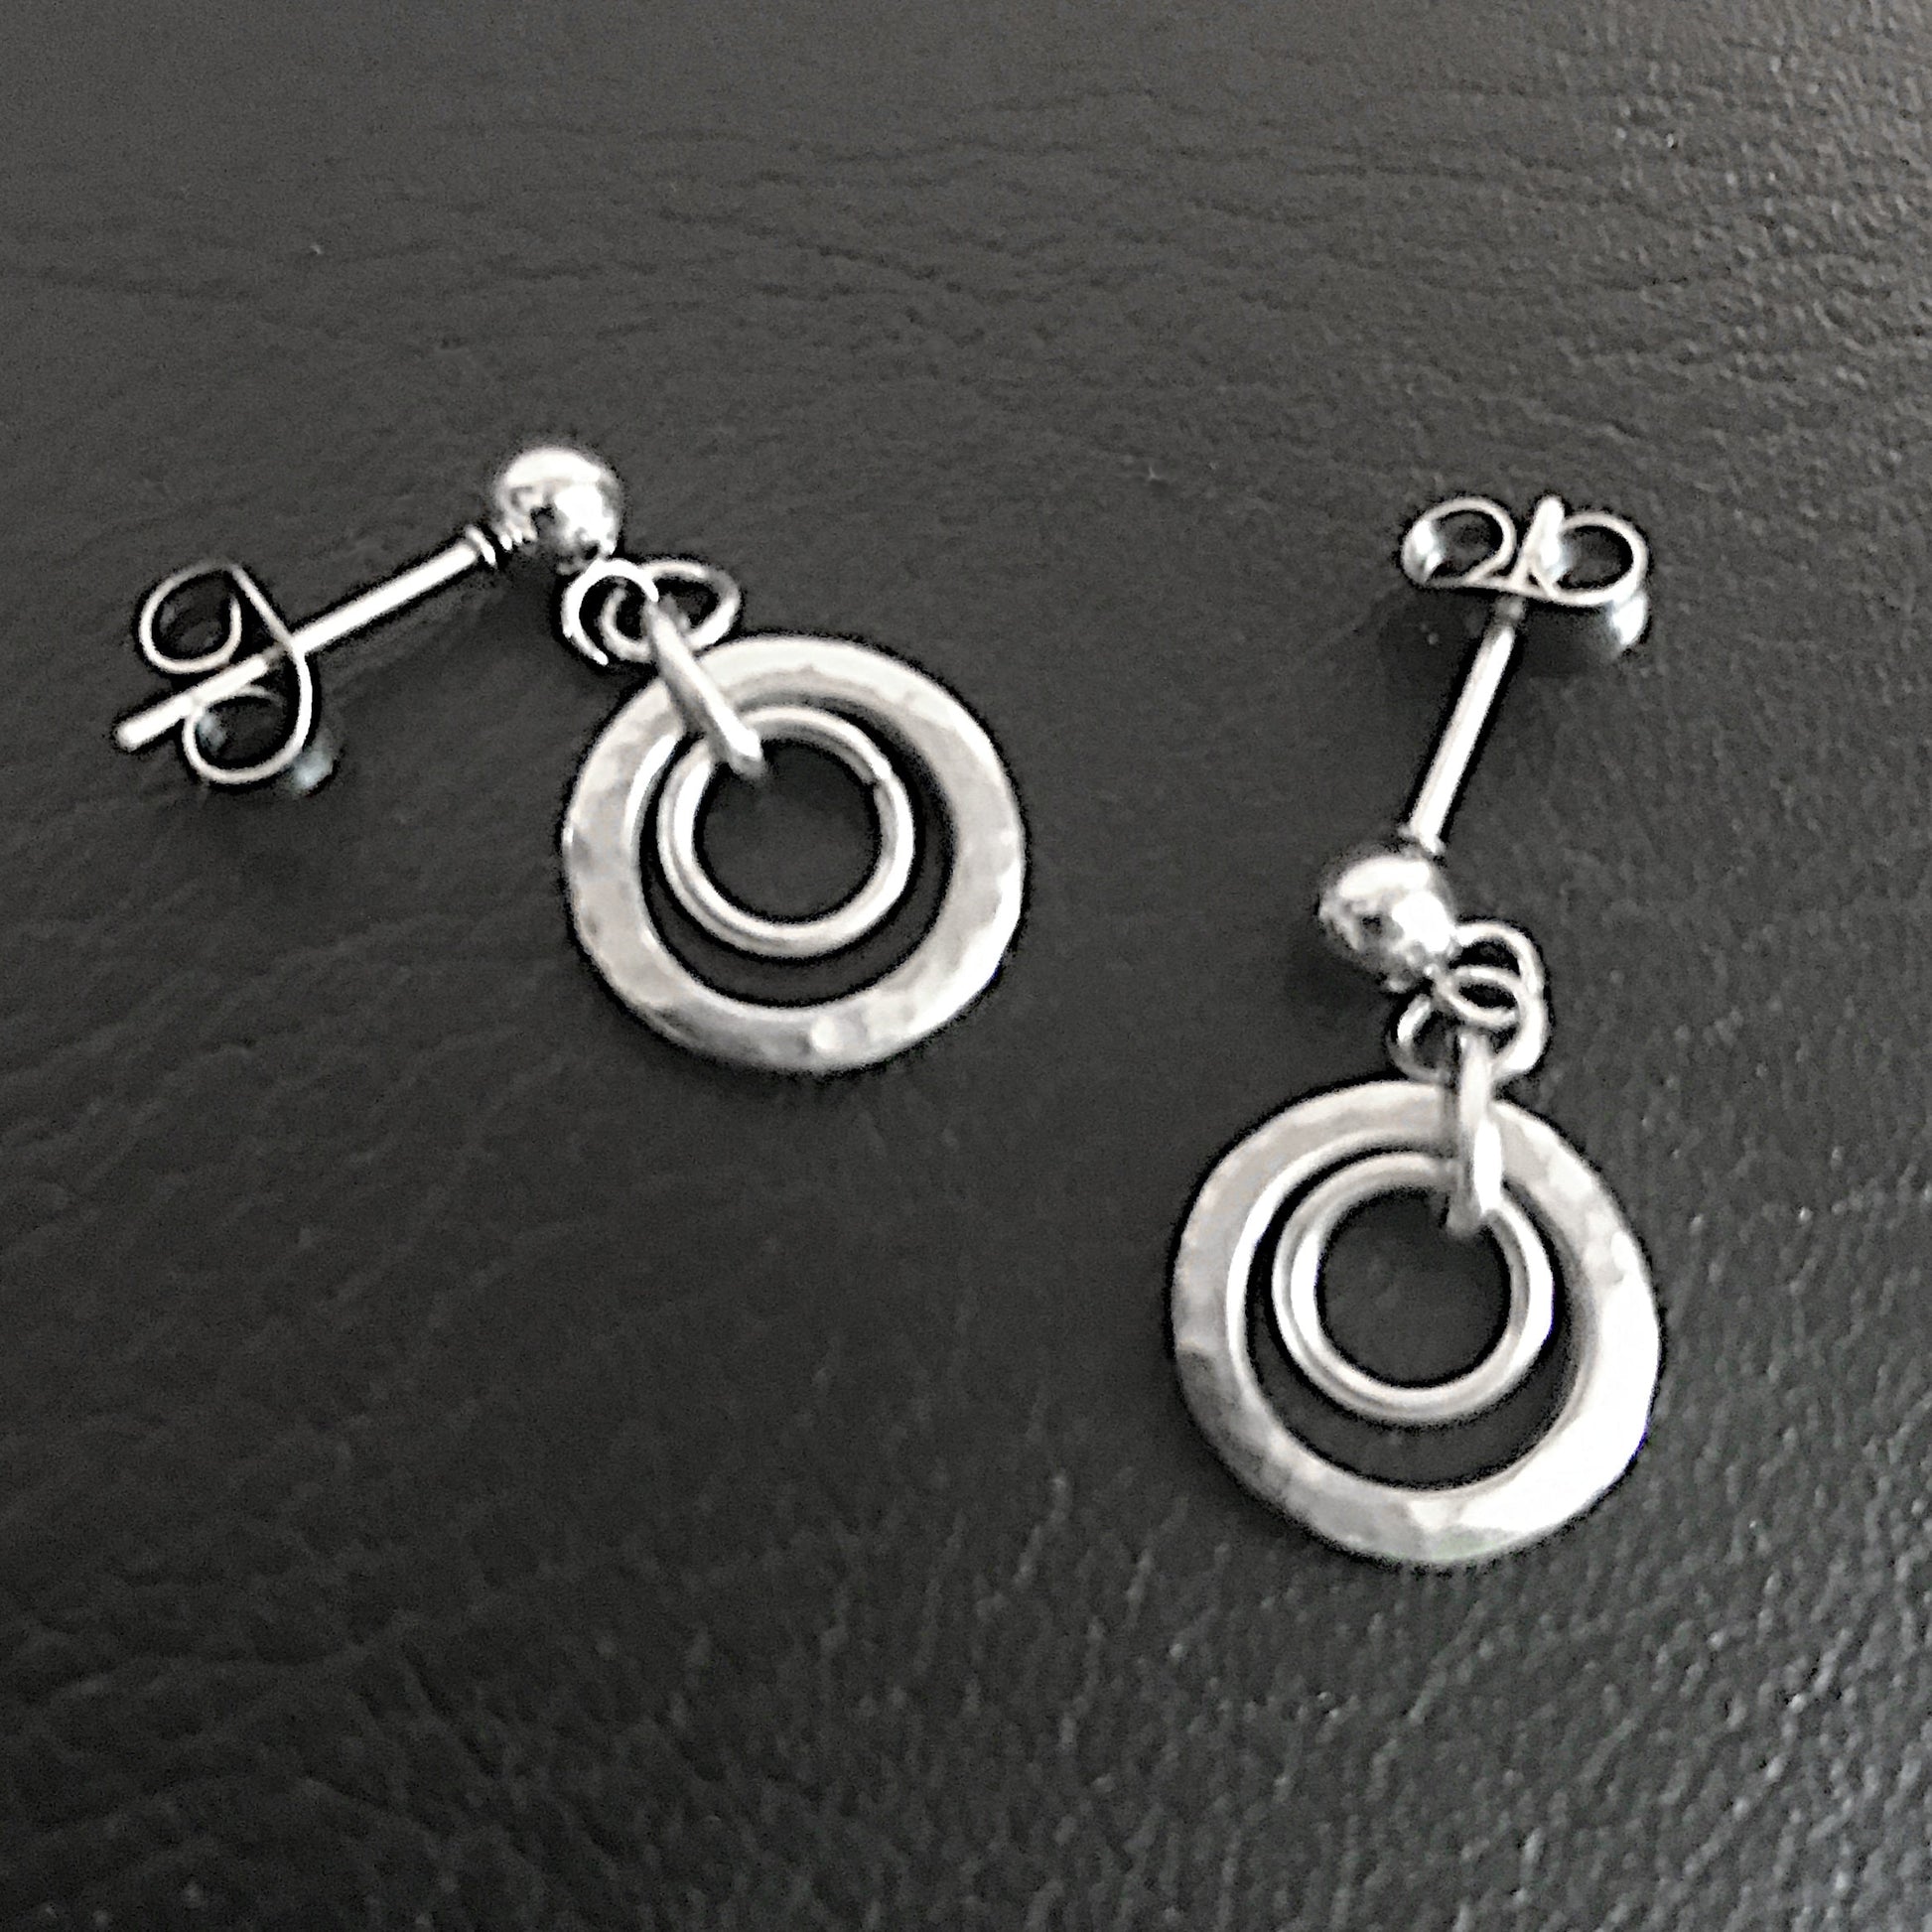 Small Silver Hammered Circle Earrings, Textured Dangle Post Earrings, Stainless Steel Stud Earrings, Sensitive Ears, Everyday Jewelry